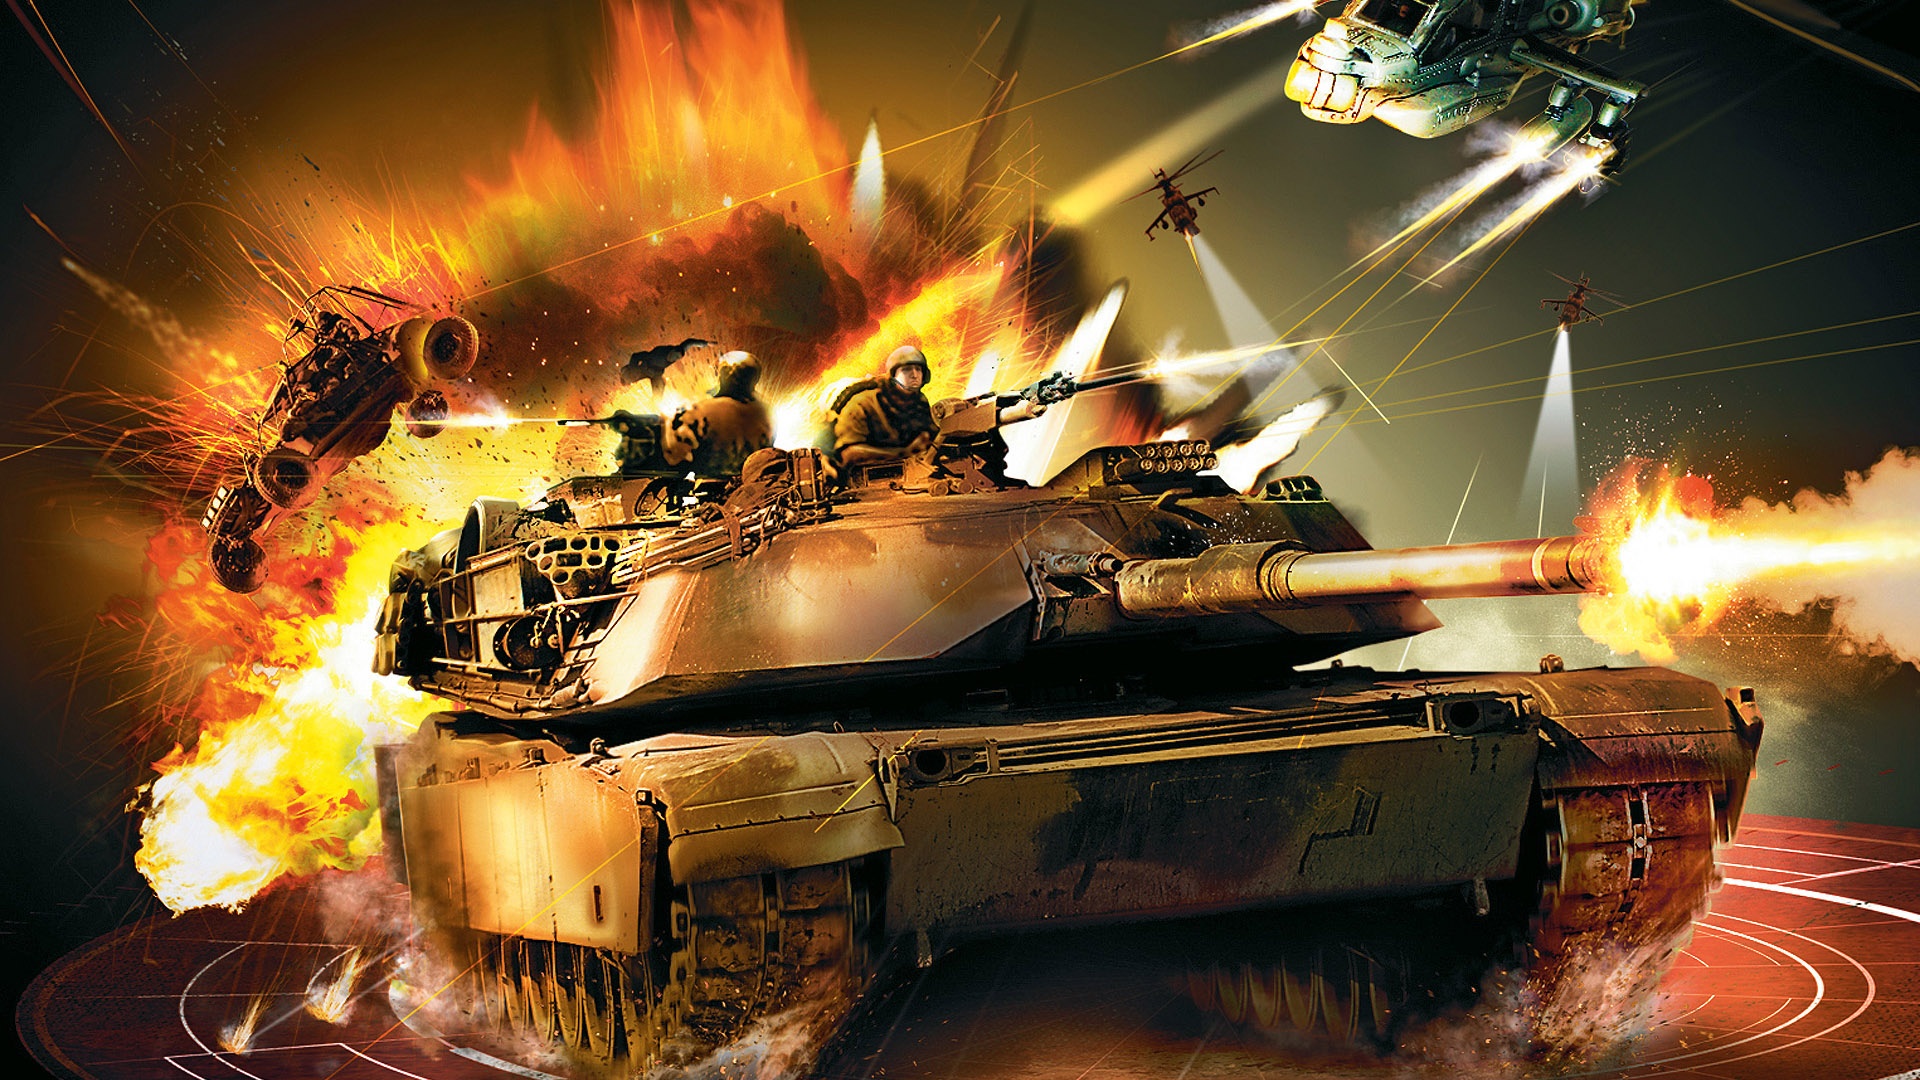 Army Tank Wallpaper In HD For